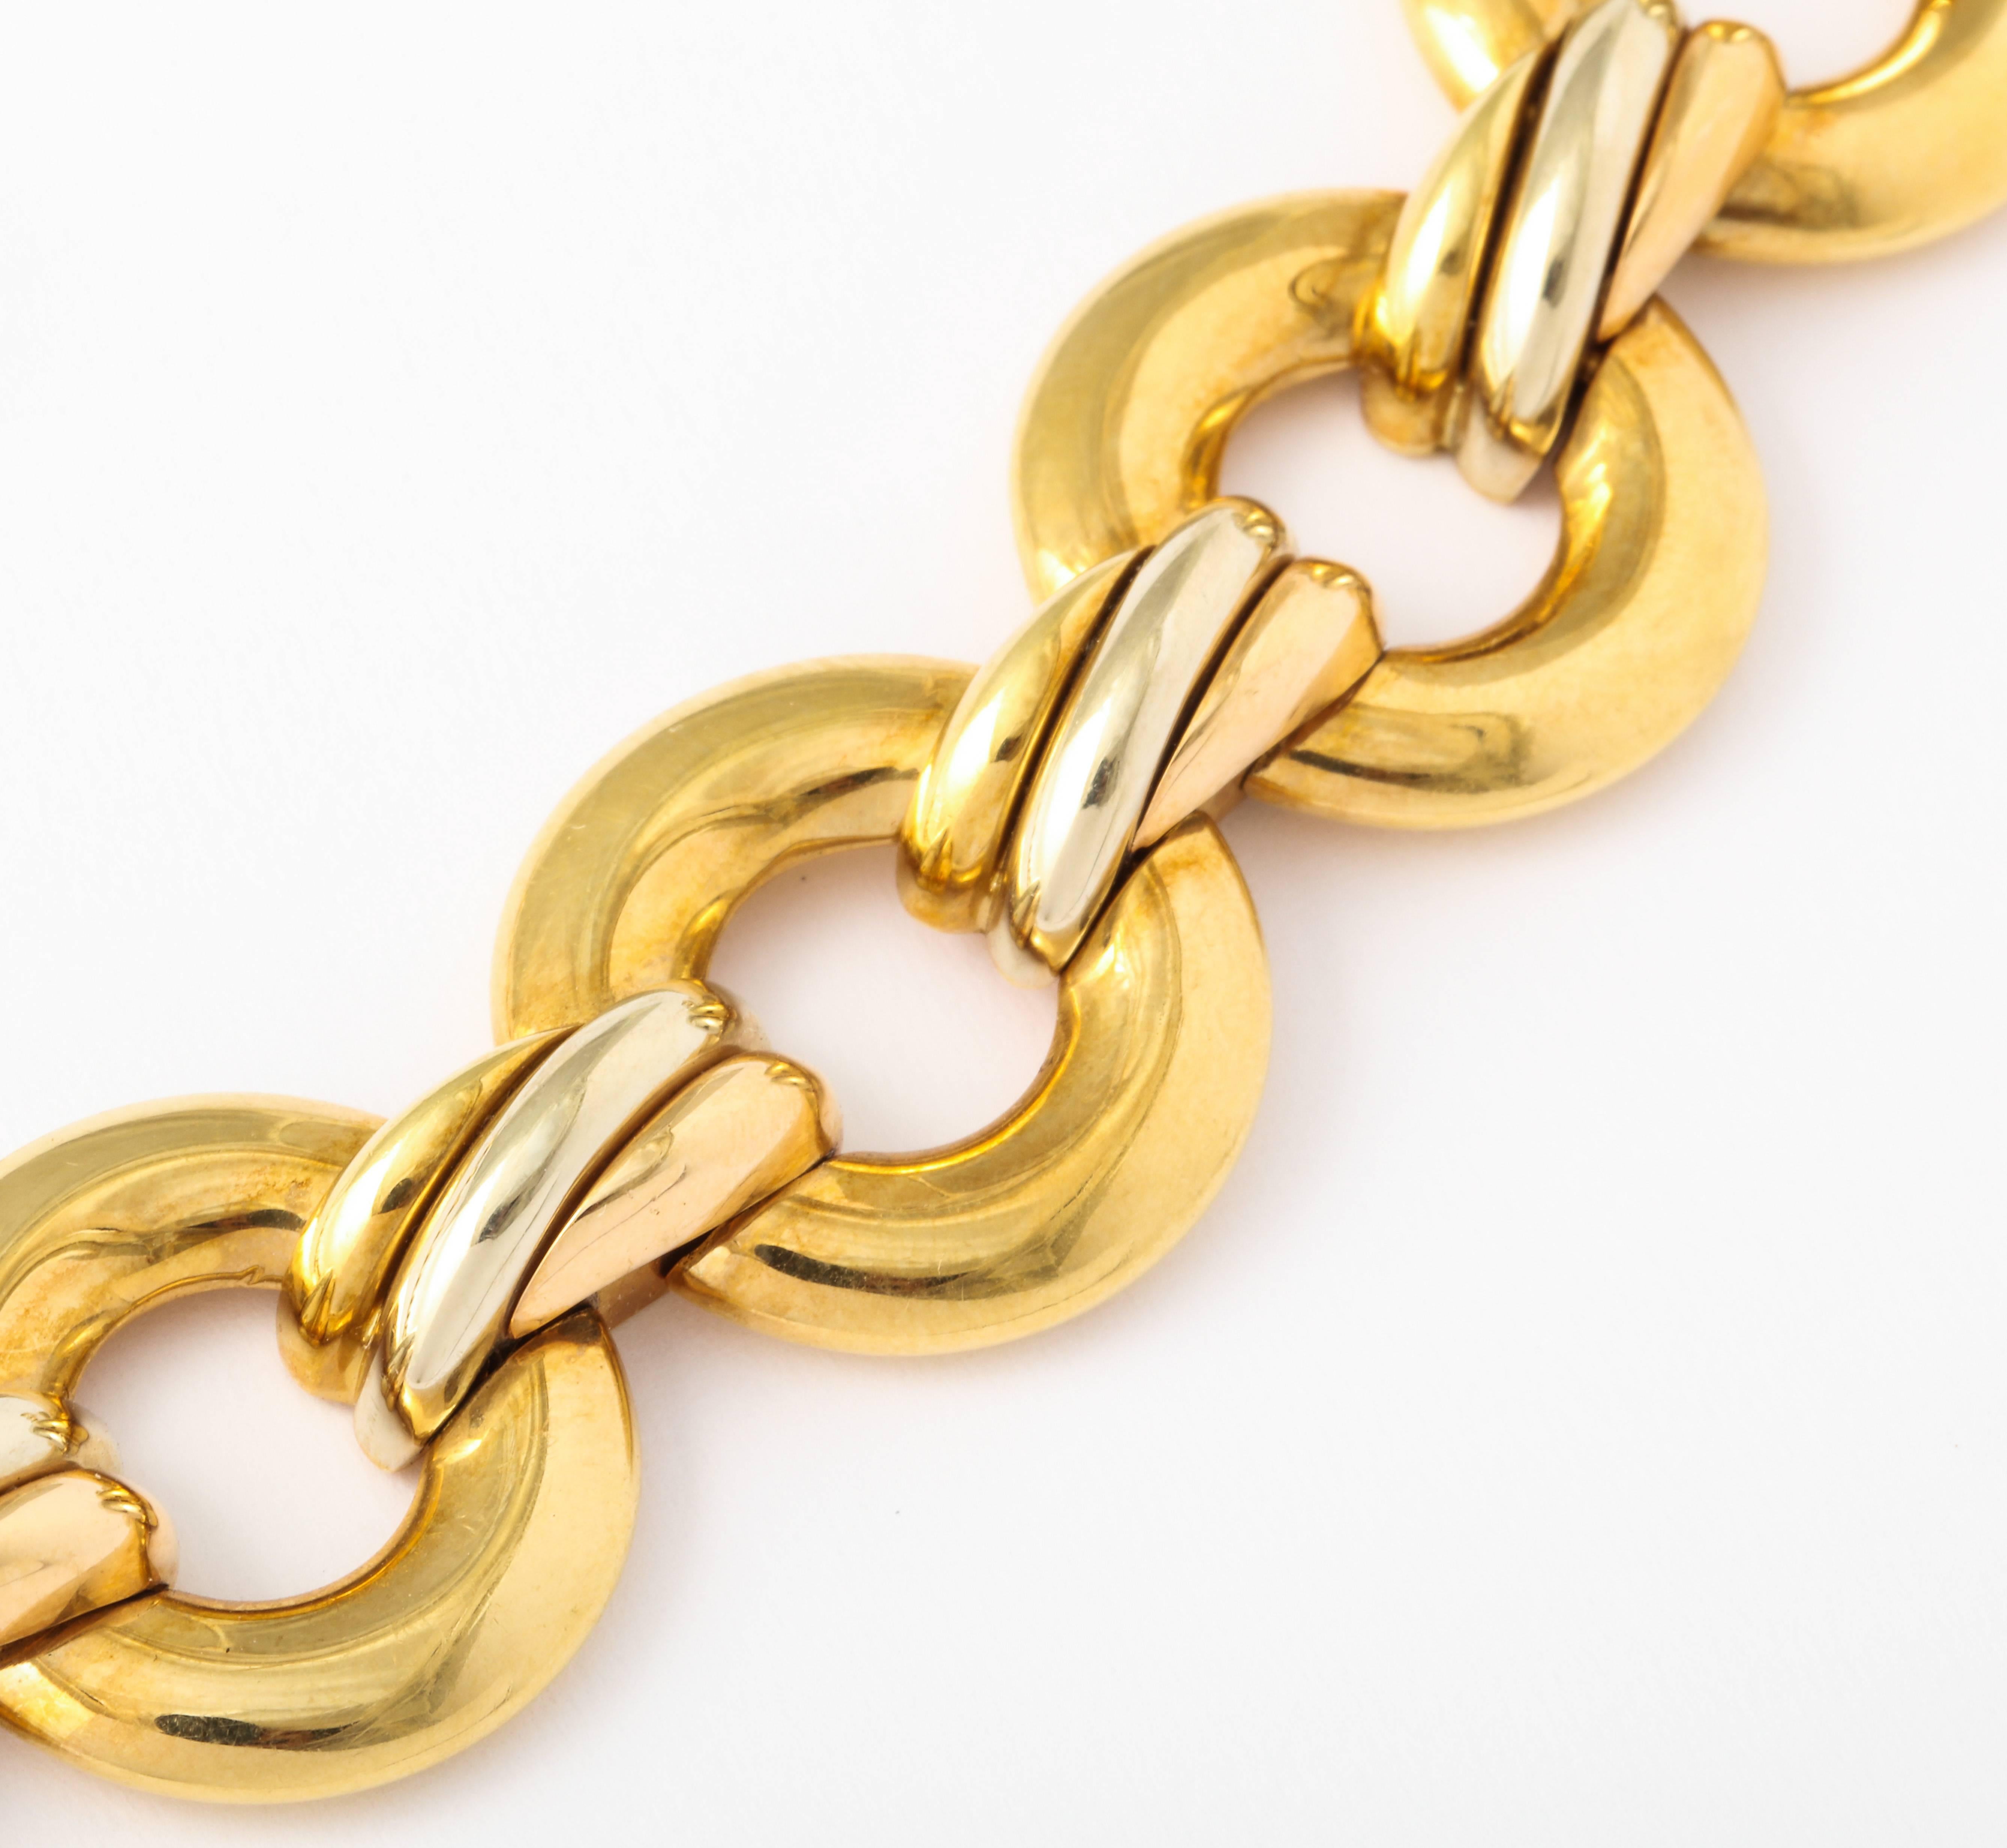 Cartier Gold Link Necklace

Signed, hallmarked and serial numbered.

Made in 1996

18 Karat Yellow gold